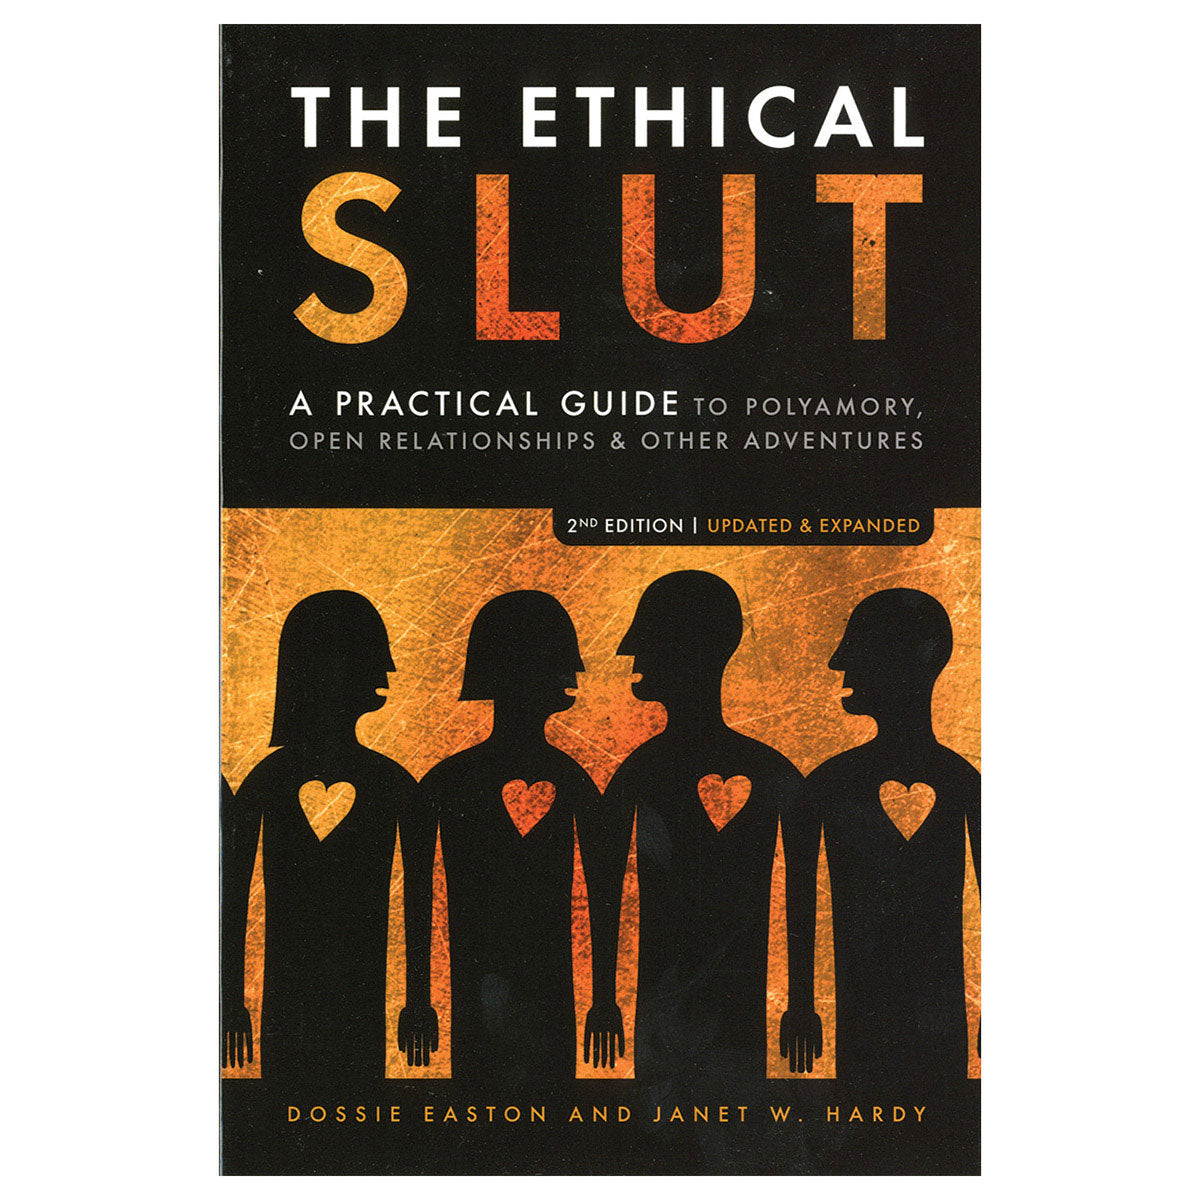 Ethical Slut - A Practical Guide to Polyamory, Open Relationships & Other Adventures - Celestial Arts